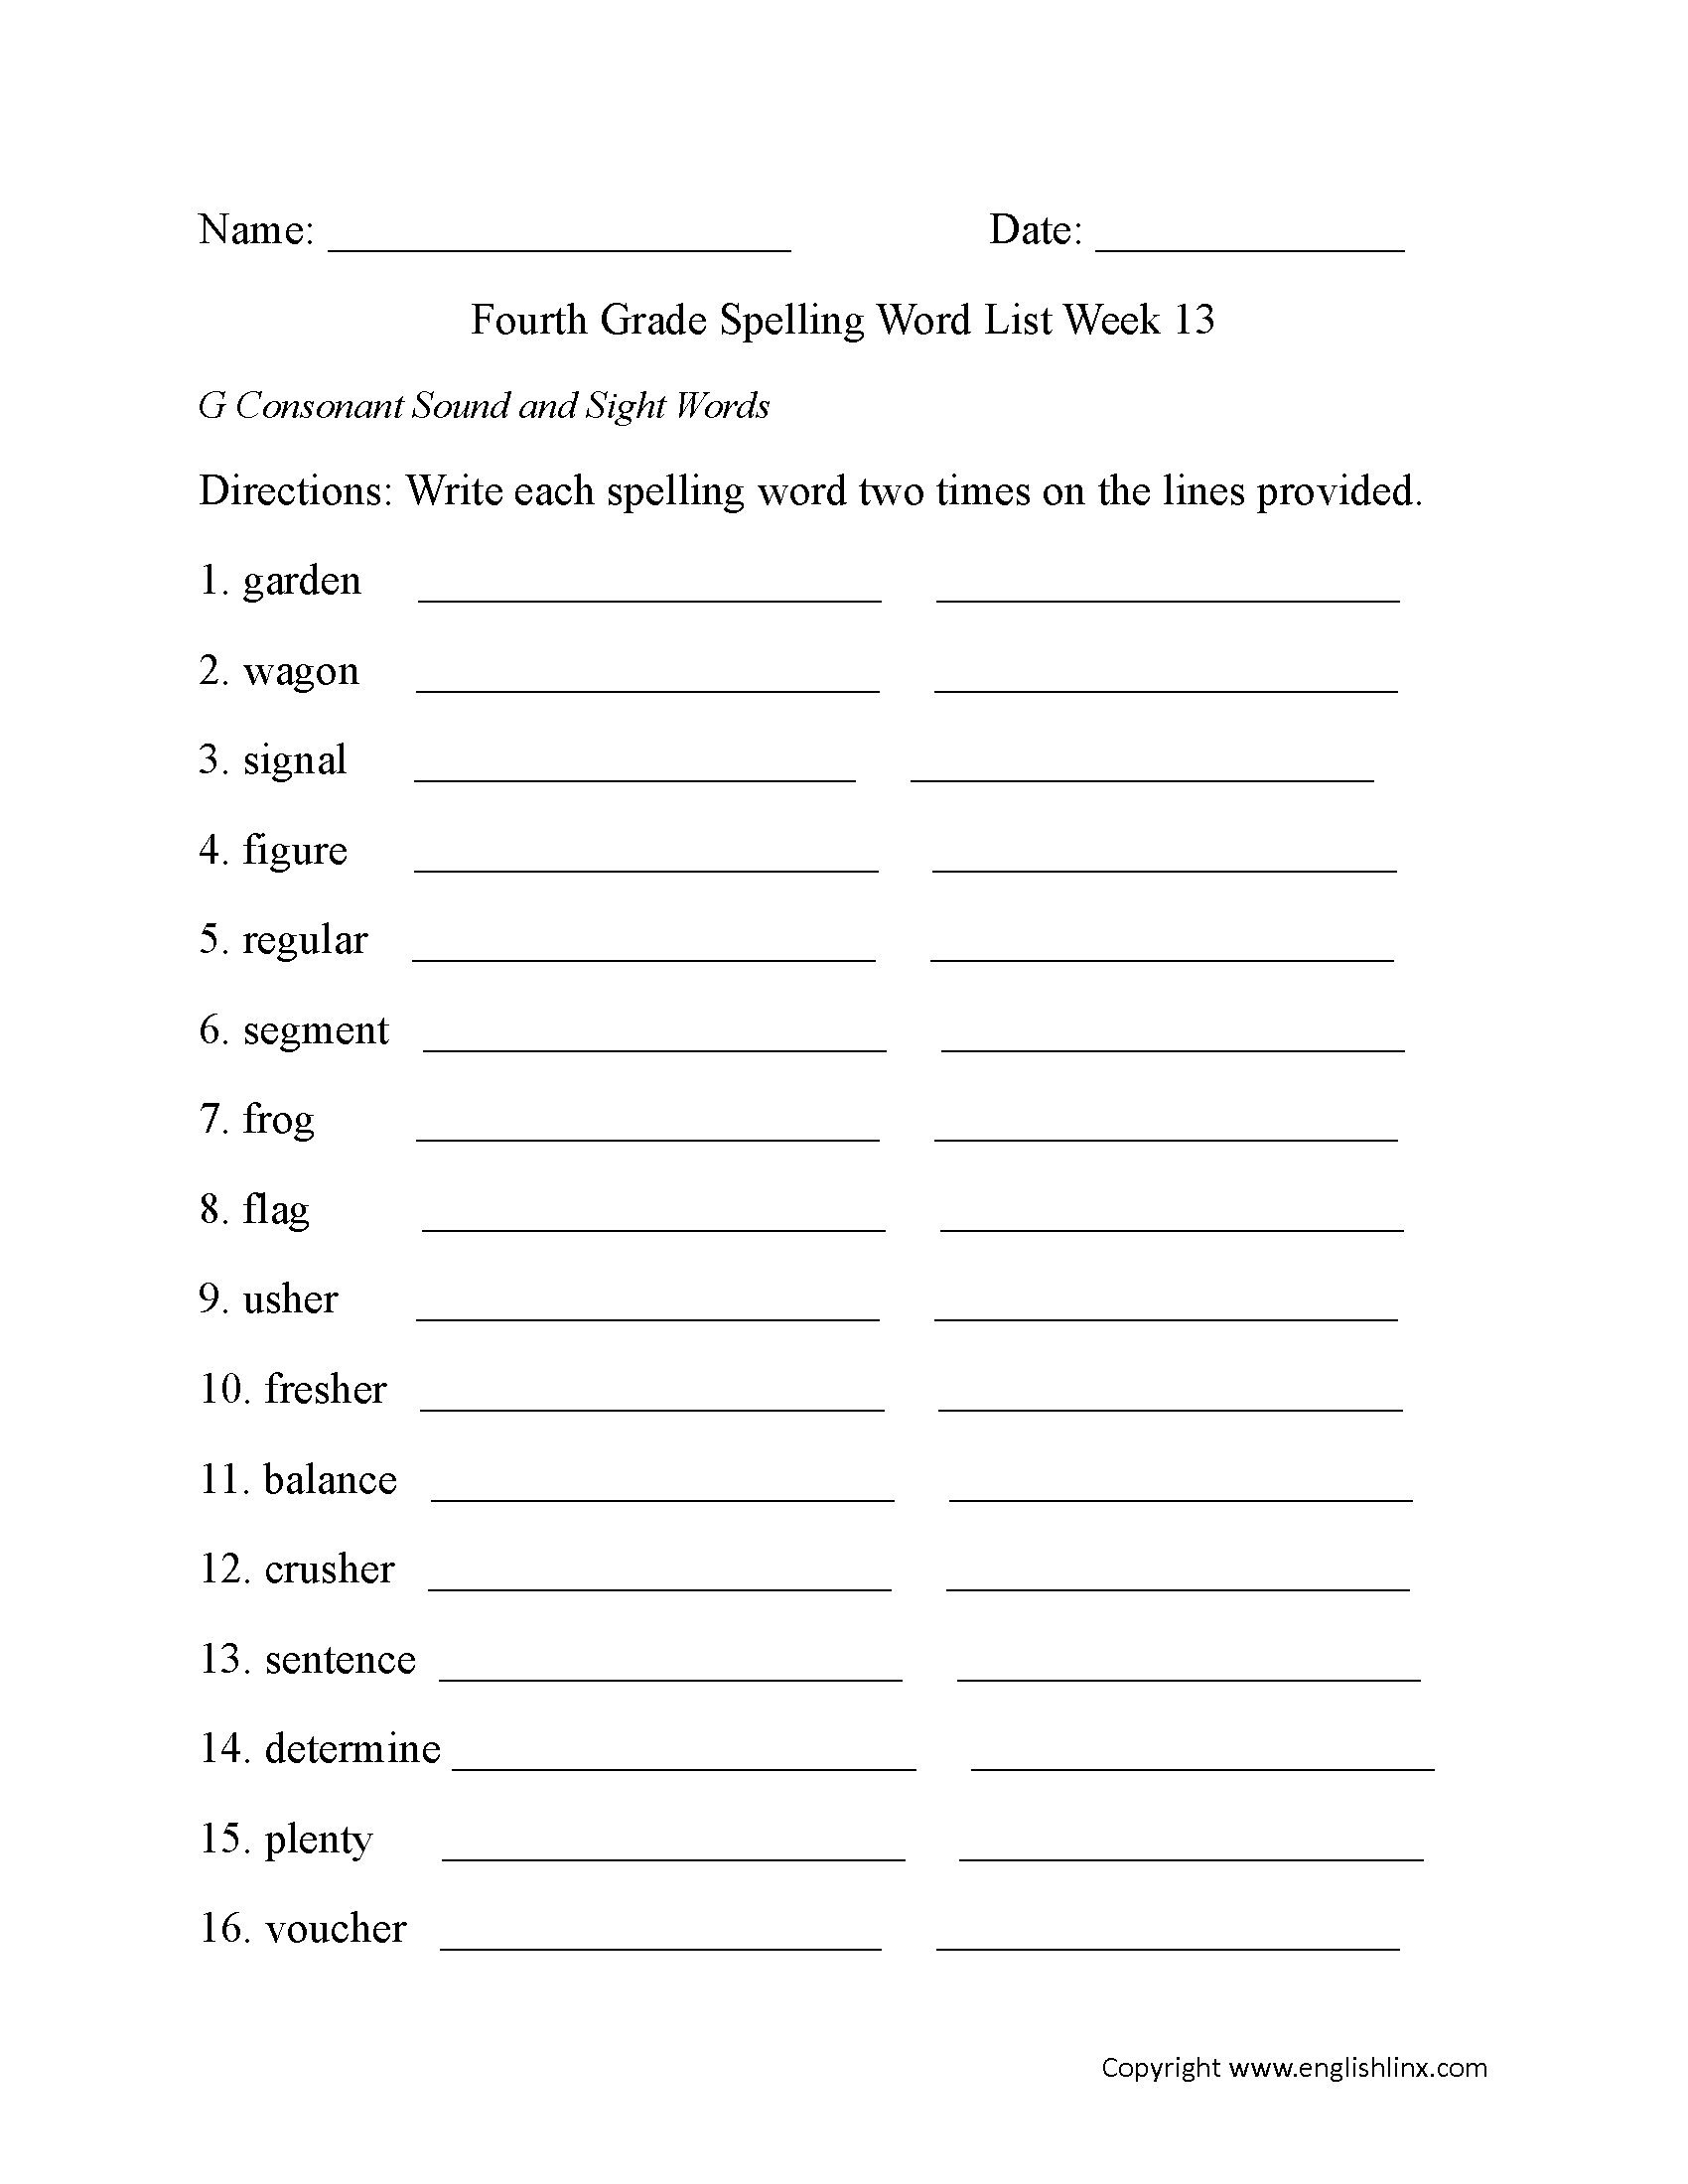 Week 13 G Consonant and Sight Words Fourth Grade Spelling Words Worksheets